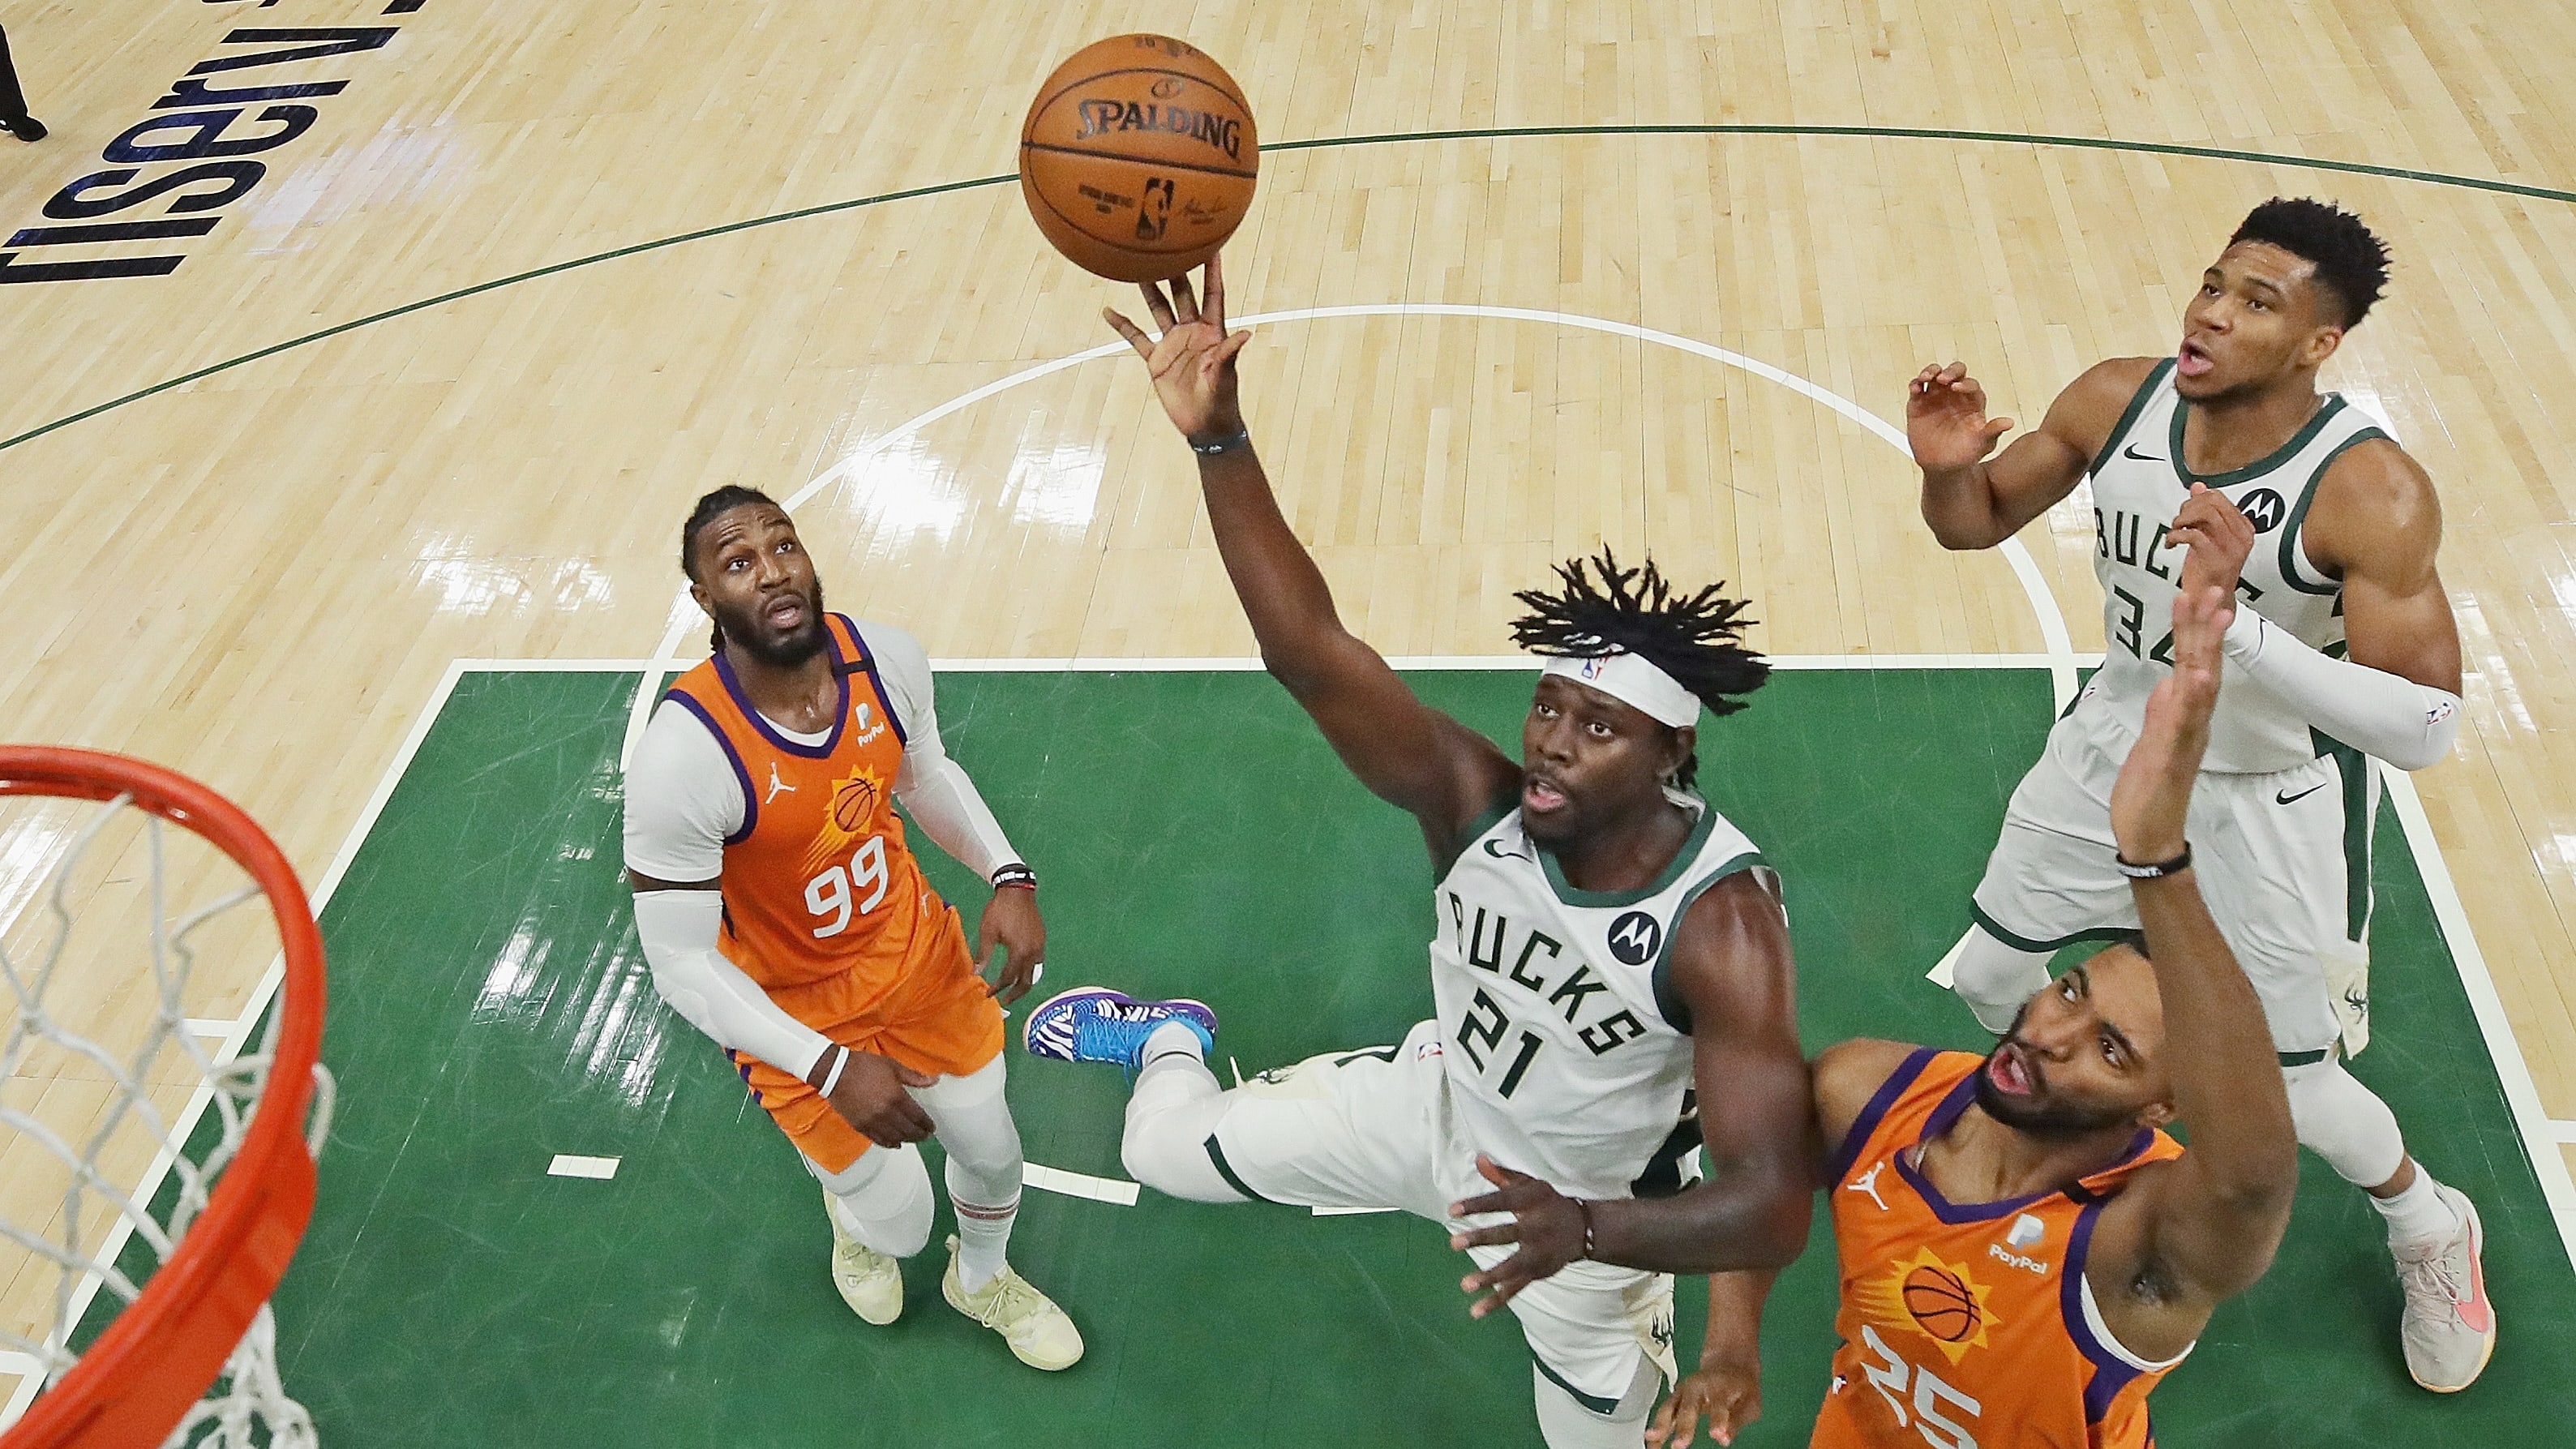 When Is Game 6 of the NBA Finals? Date, Time, TV Schedule for Suns vs Bucks